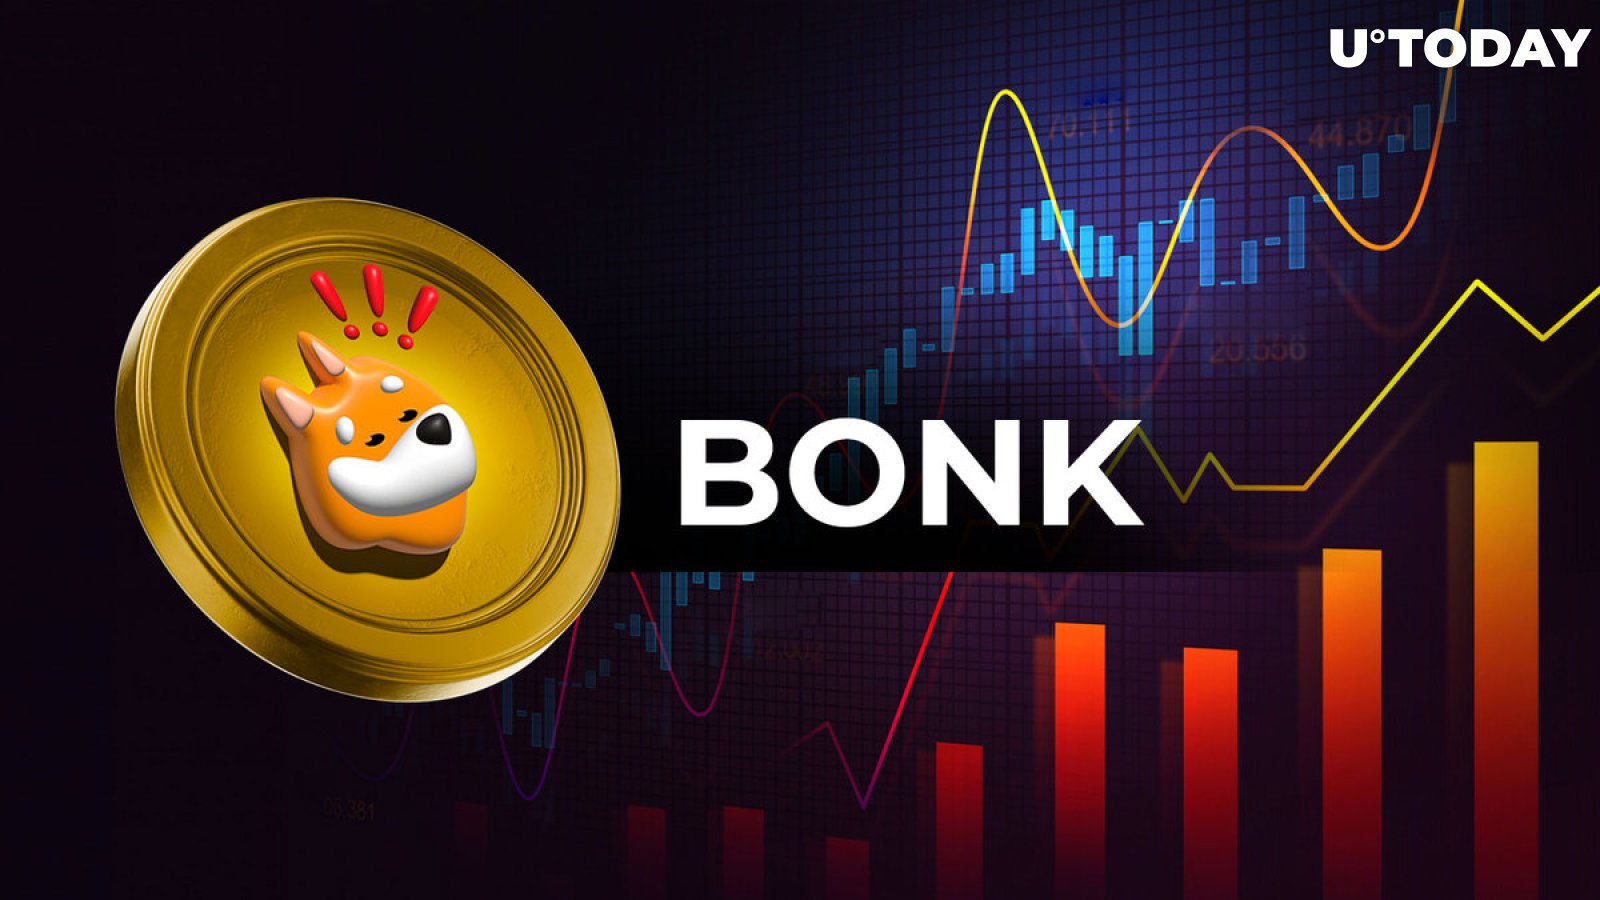 Solana's Bonk (BONK) 13,000% Spike, Here's What to Pay Attention To: Analyst